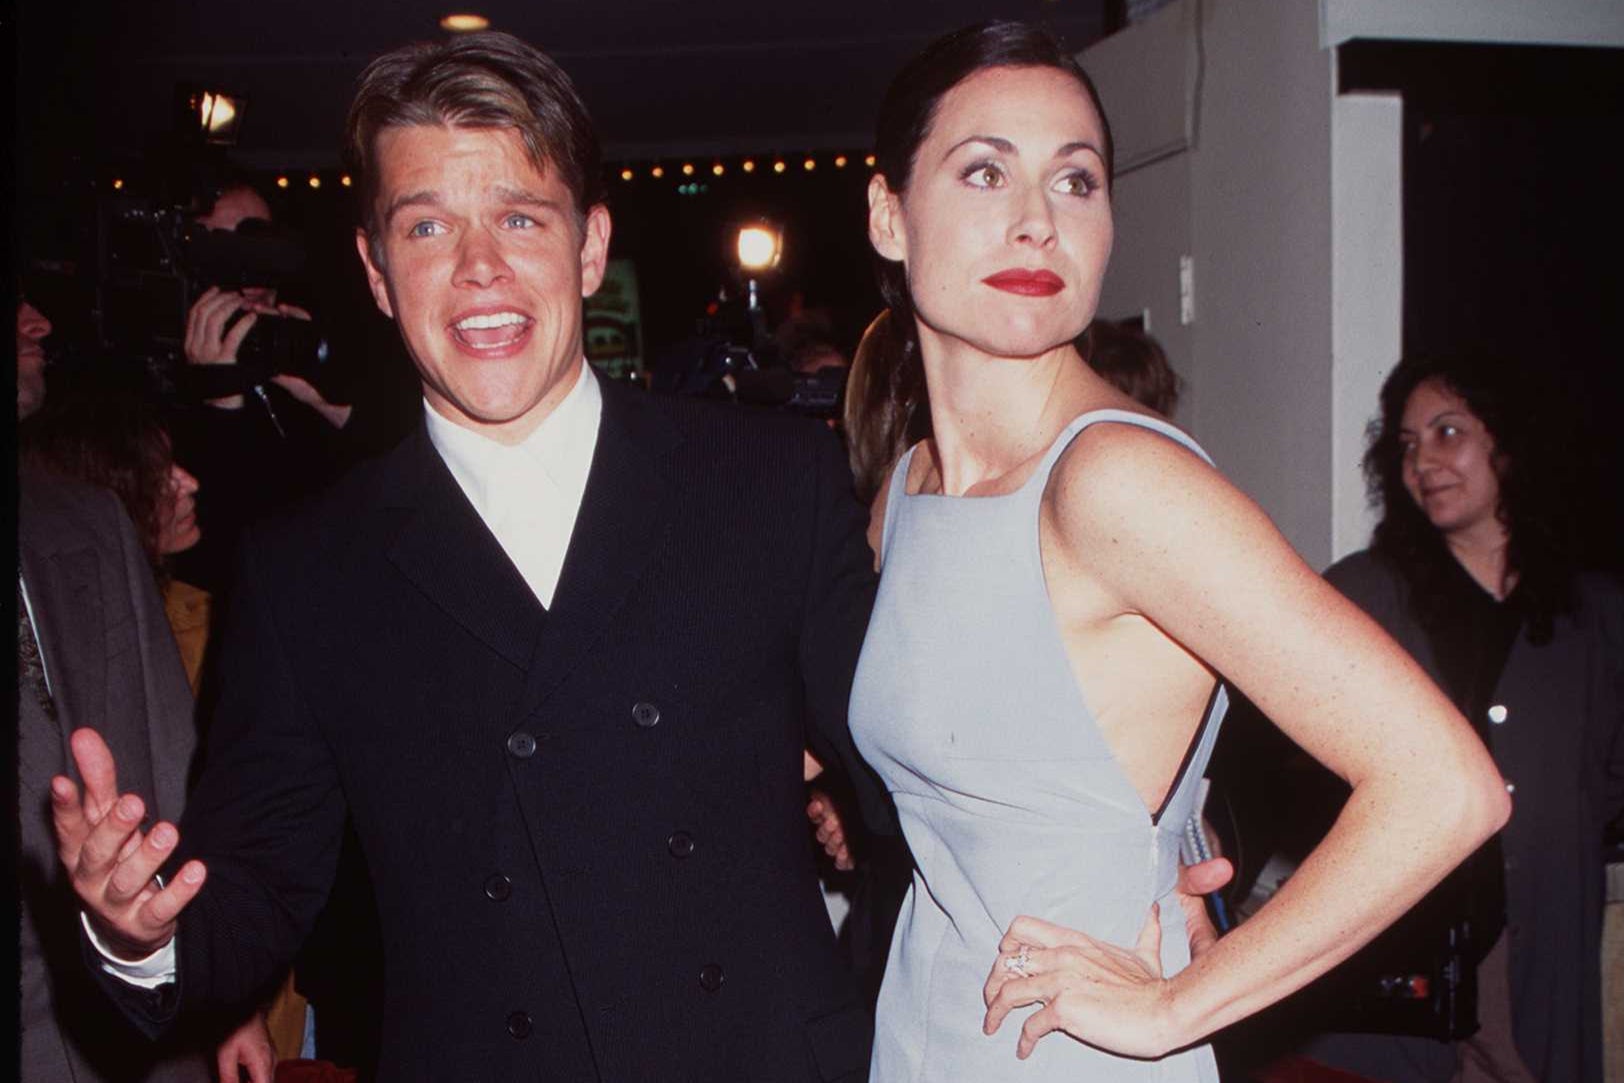 Matt Damon and Minnie Driver at the premiere of ‘Good Will Hunting’ in 1997